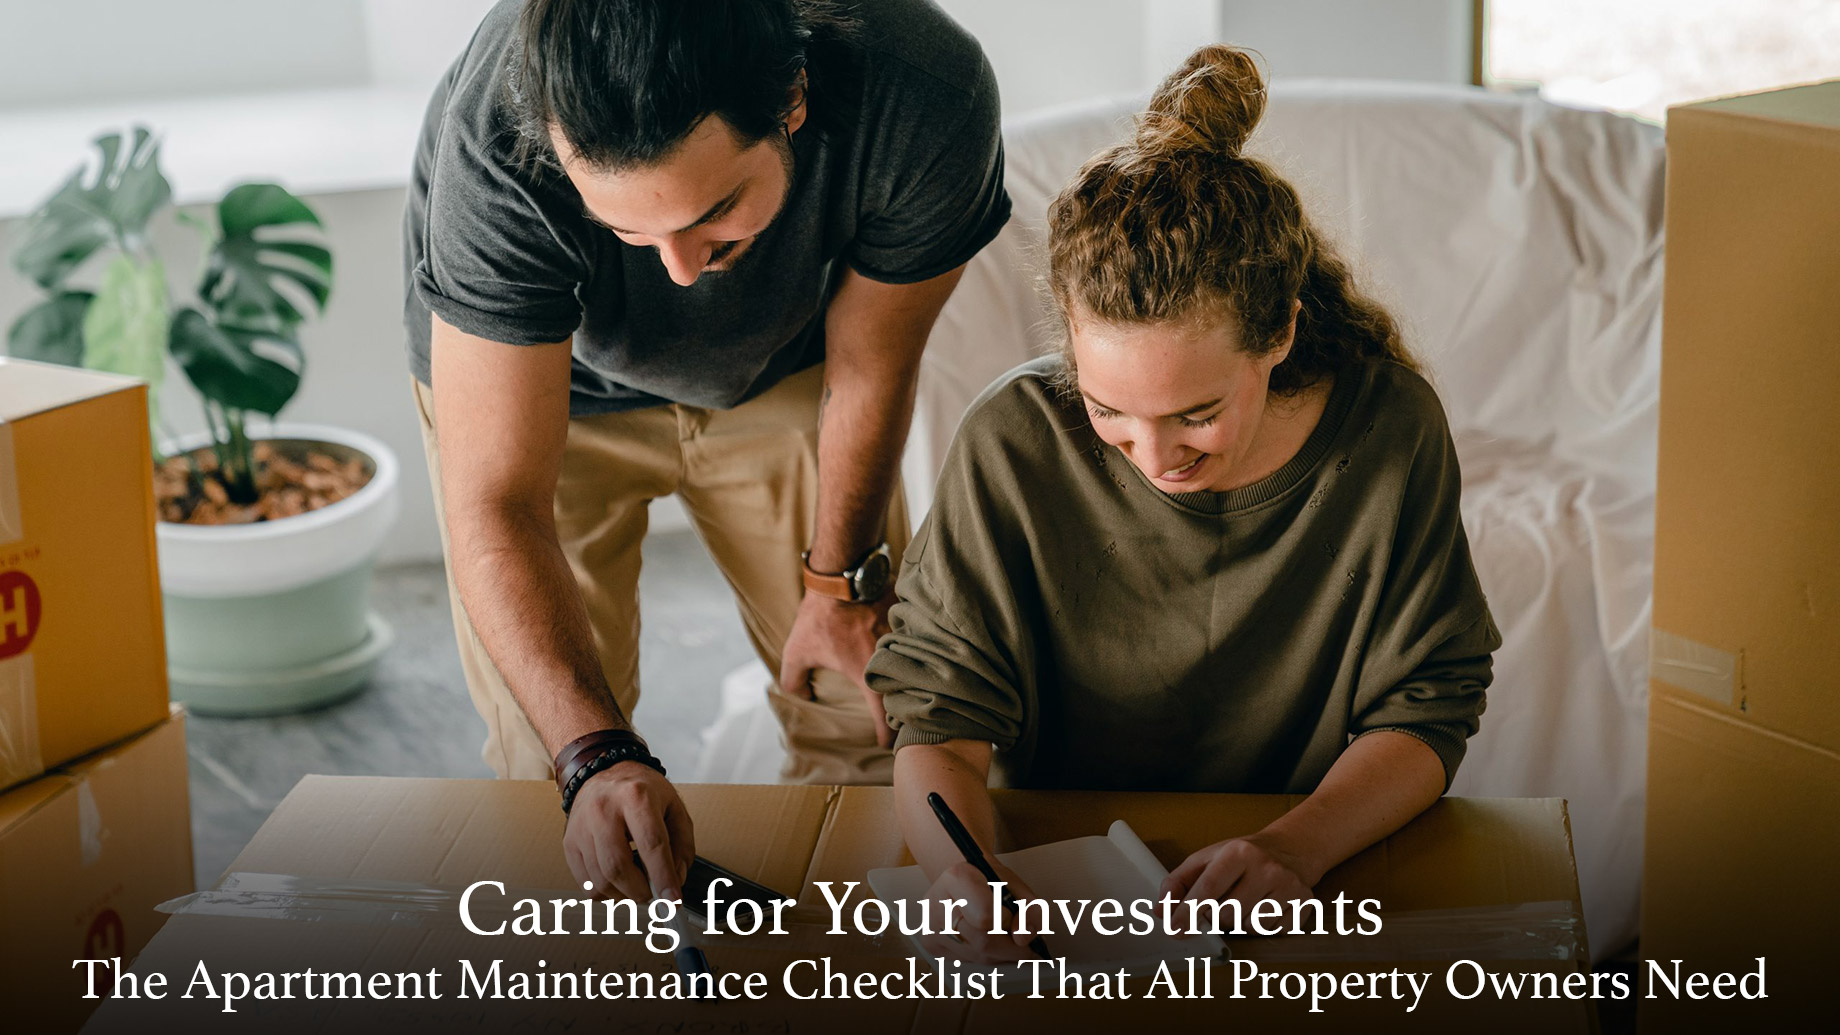 Caring for Your Investments - The Apartment Maintenance Checklist That All Property Owners Need